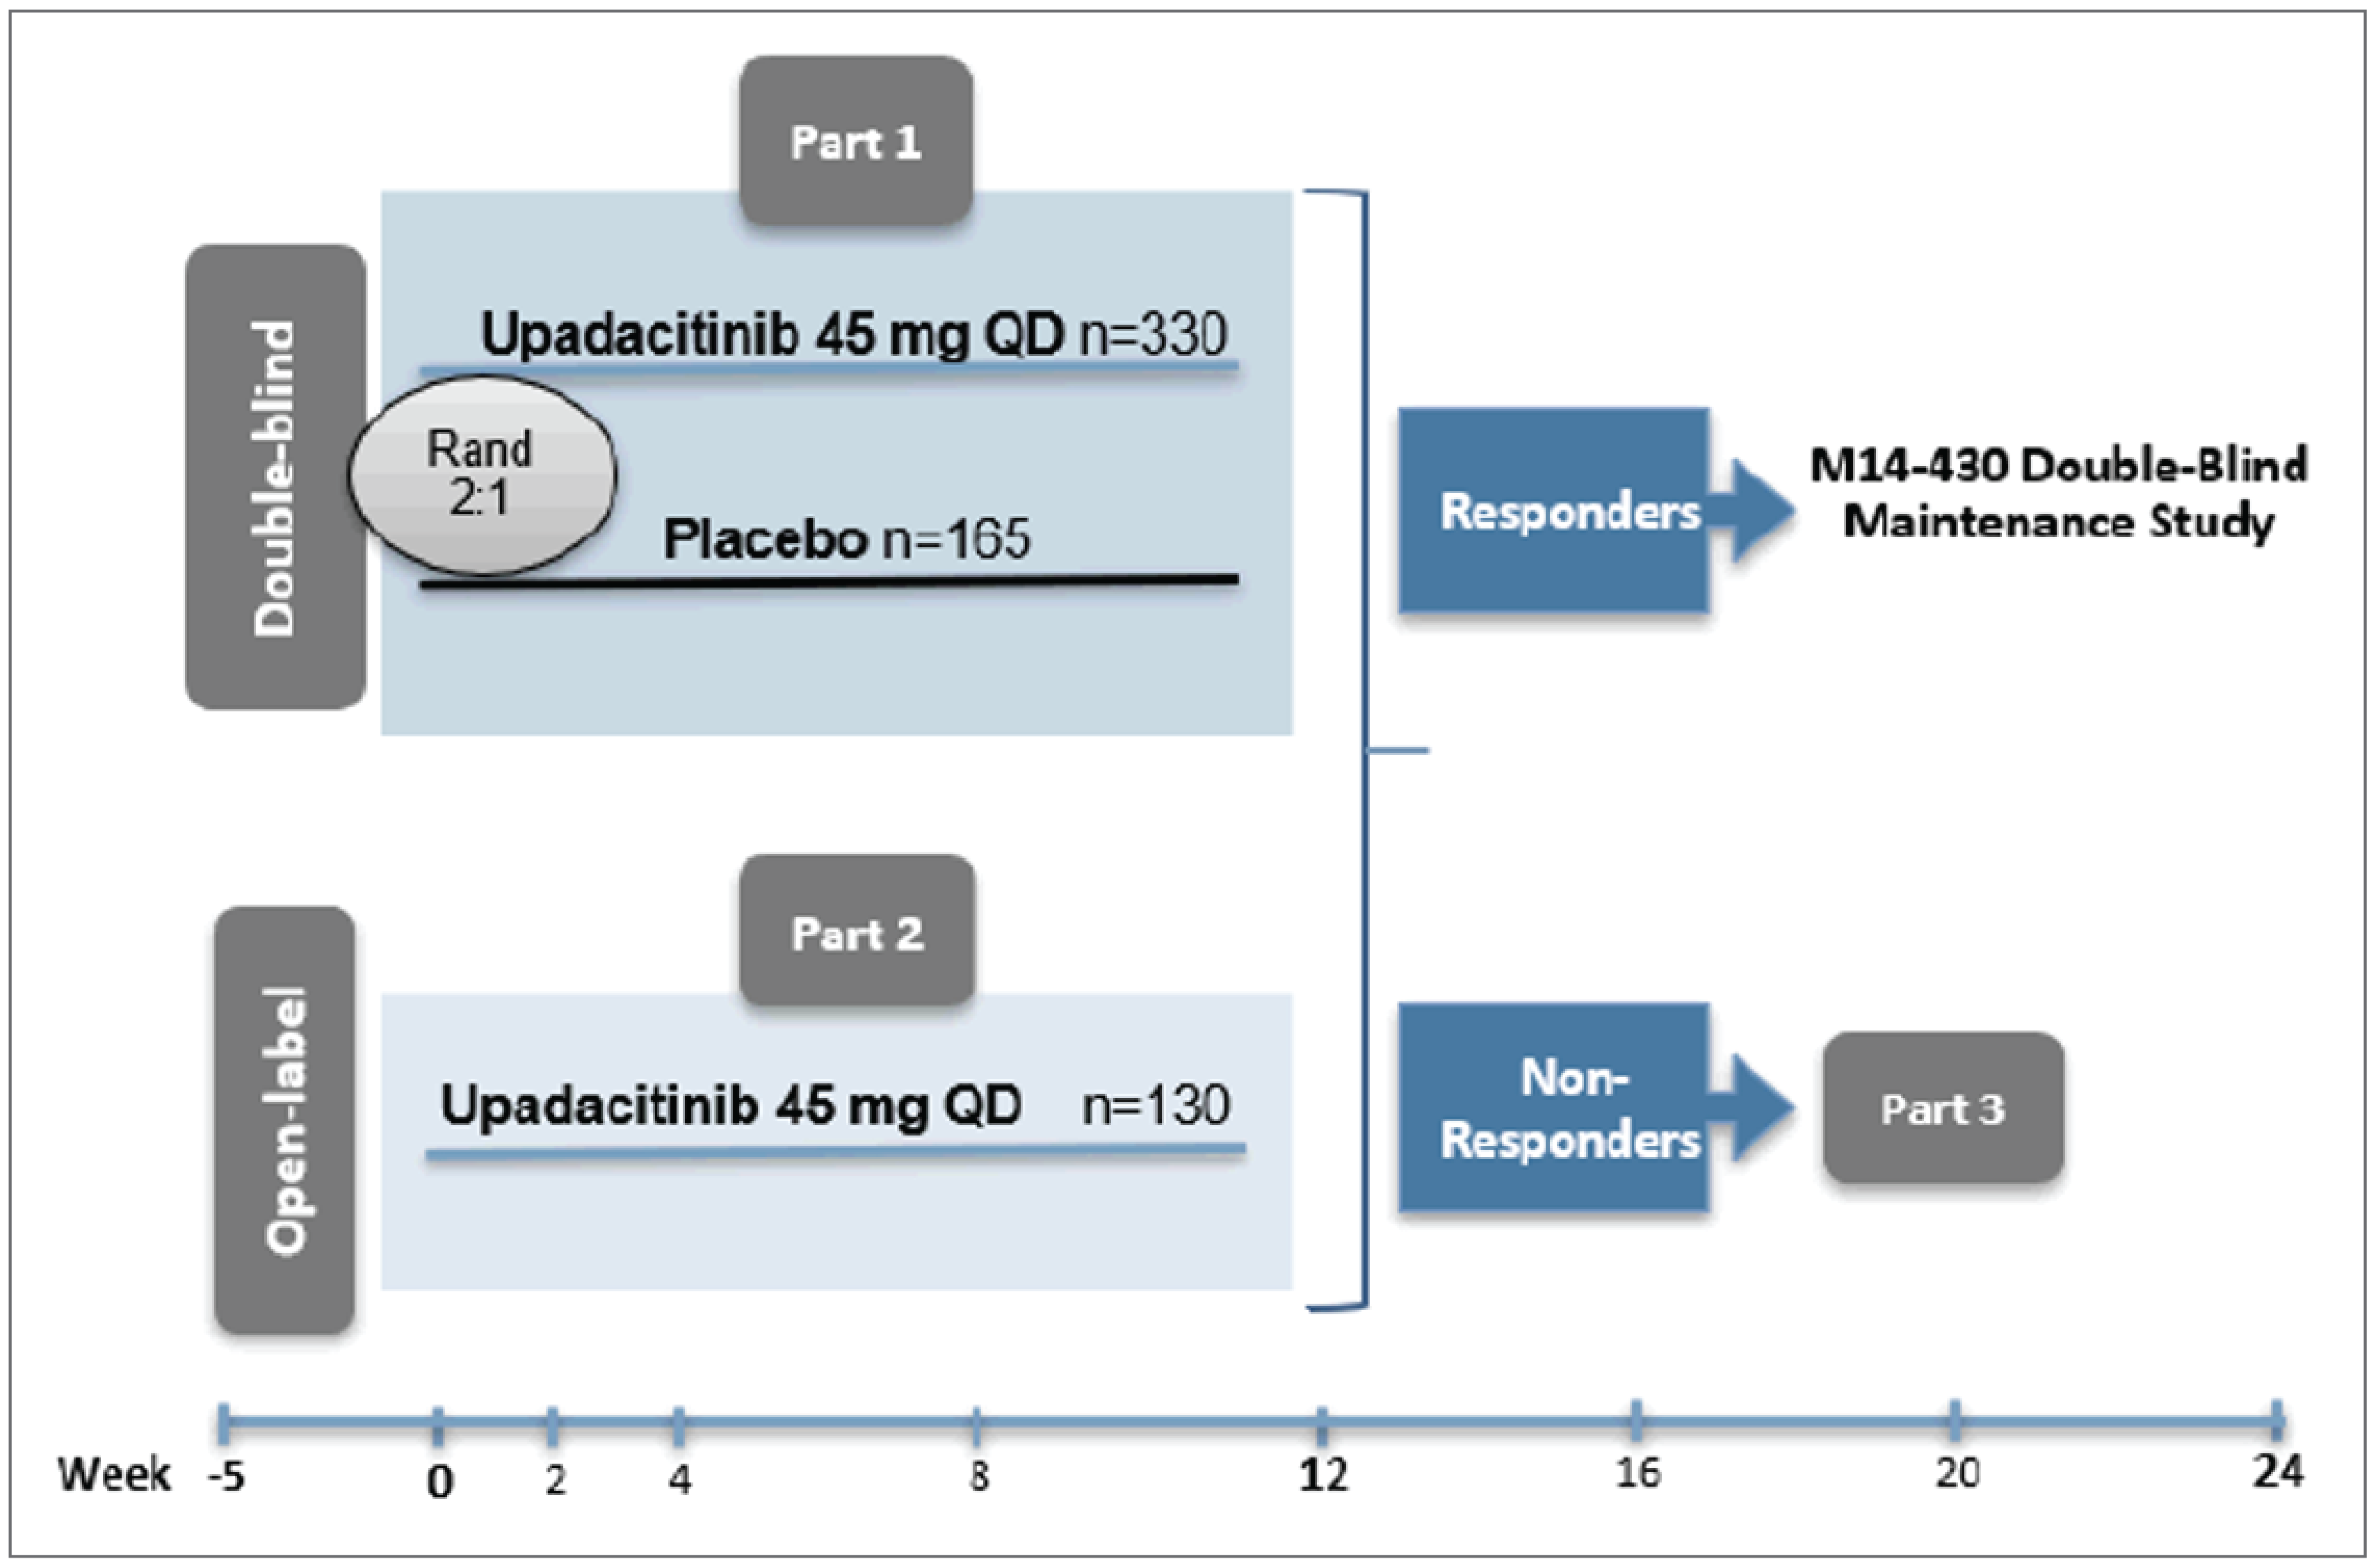 A flow diagram depicting the design of the U-EXCEED trial. Patients in part 1, which was double-blinded and 12 weeks long, were randomized 2:1 to upadacitinib 45 mg once daily (n = 330) or placebo (n = 165). Patients in part 2 received open-label upadacitinib 45 mg once daily (n = 130) for 12 weeks. From both part 1 and part 2, responders could move on to the M14 to 430 double-blind maintenance study (U-ENDURE). Nonresponders moved on to part 3 of the U-EXCEED trial.